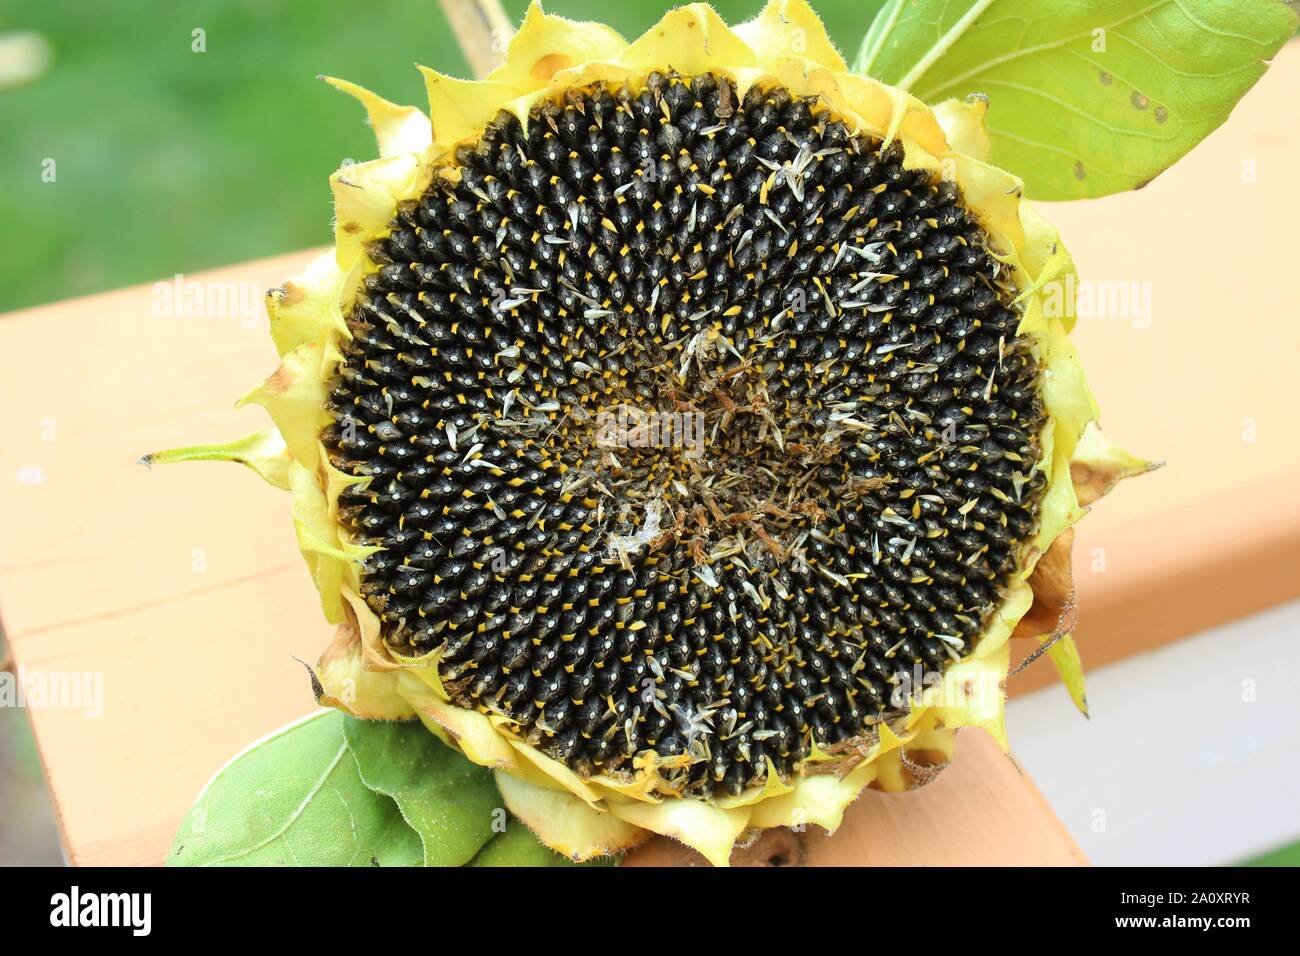 A Harvested Sunflower Head Full Of Seeds Stock Photo